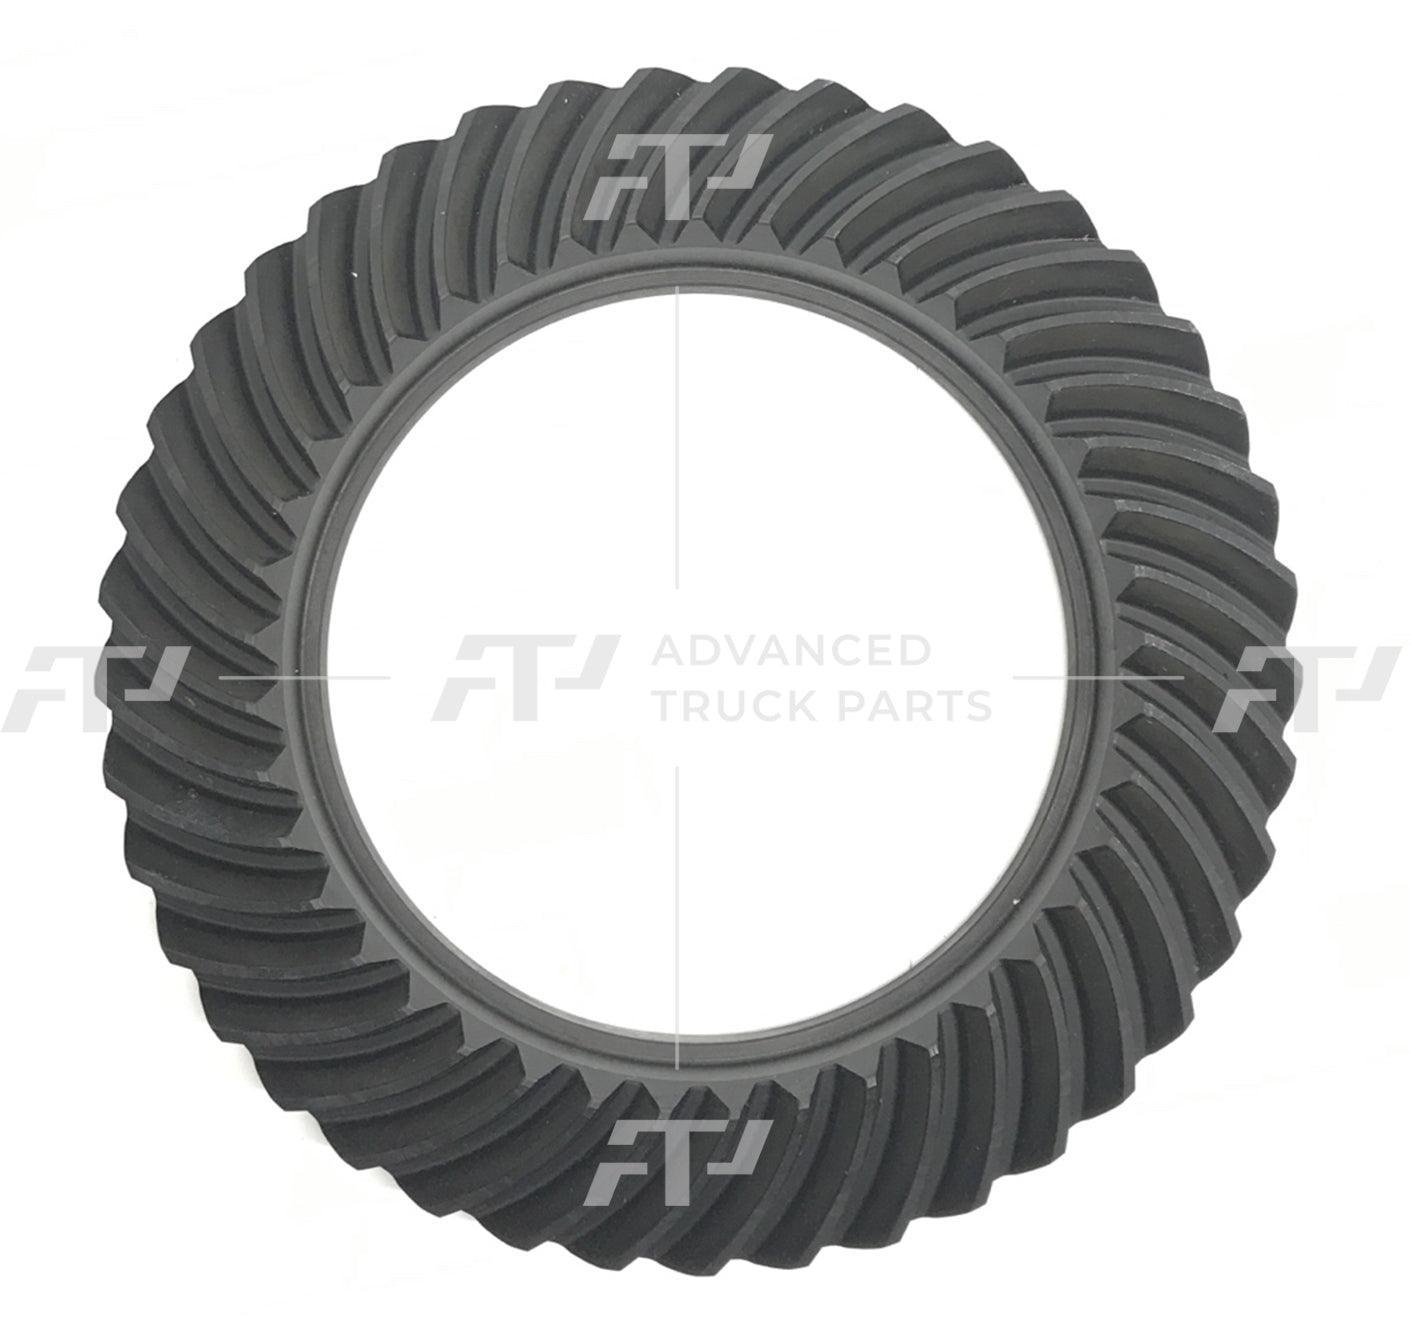 708074-1 Spicer Dana® 70 4.10 Ratio Ring And Pinion Gears Gear Set Ford E350 Rear - ADVANCED TRUCK PARTS